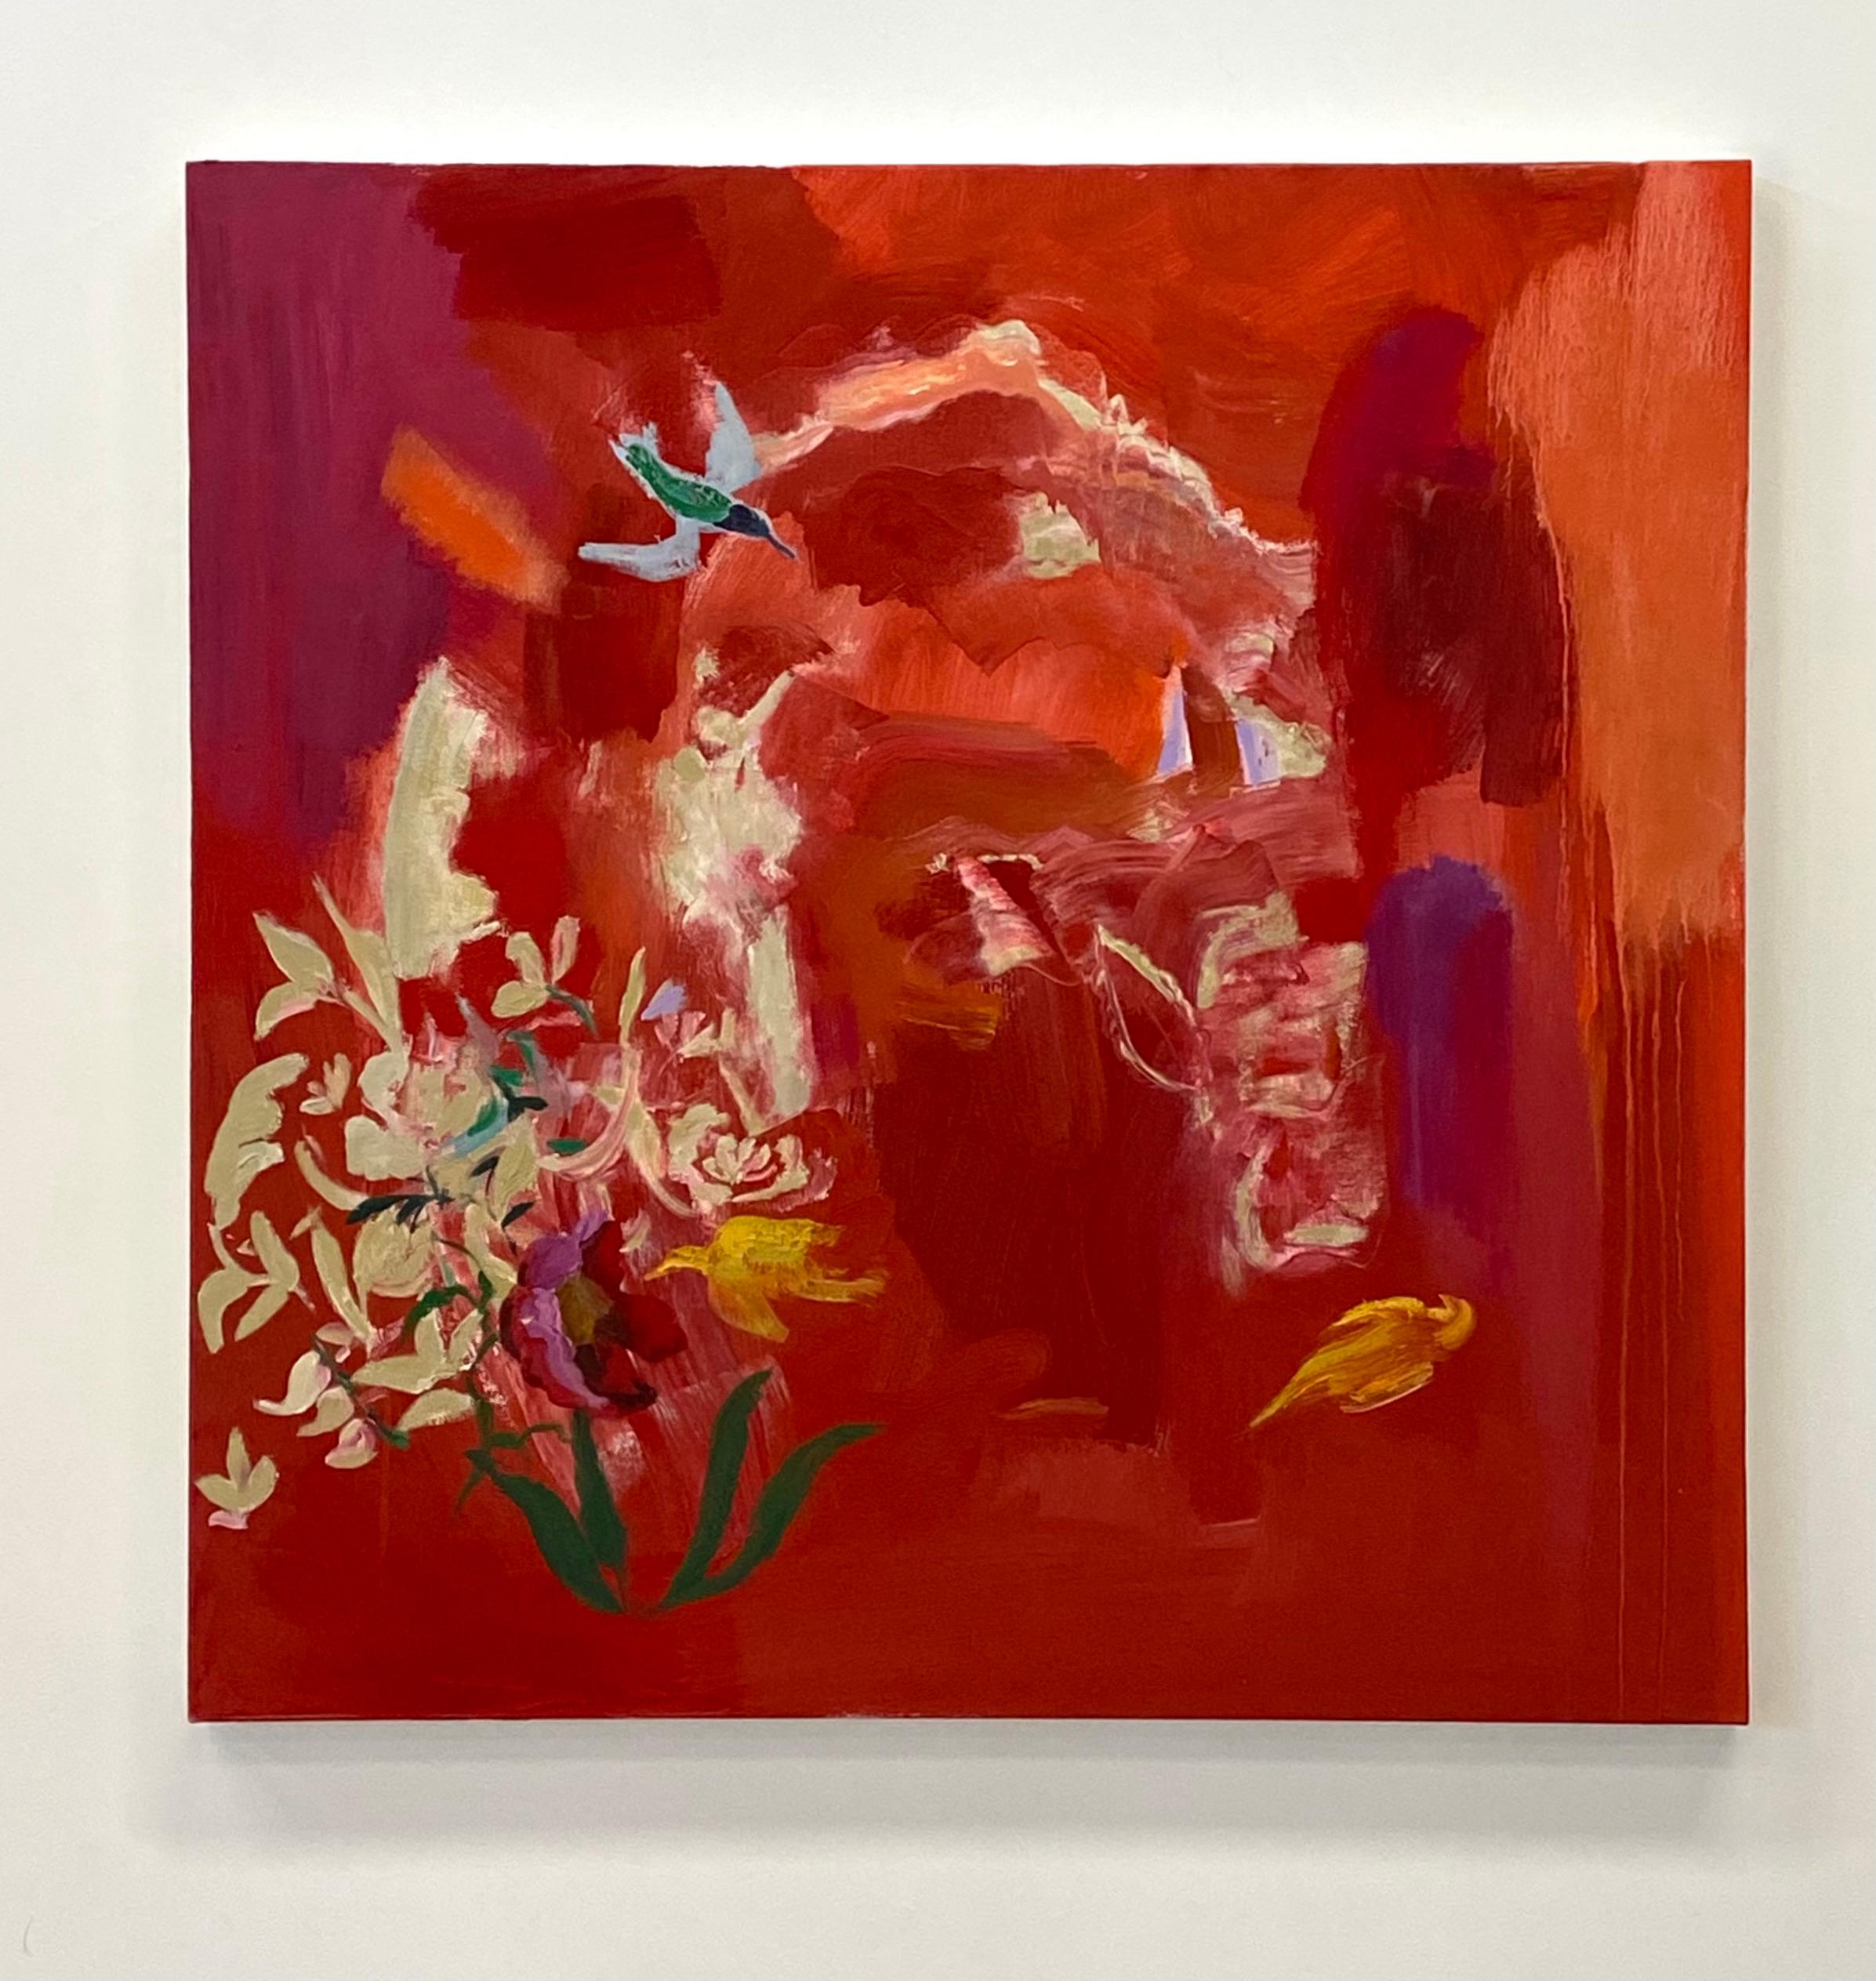 Lively abstract brushwork in bright yellow, white, purple and lush green against a dramatic crimson red orange background suggests flowers, botany and a bird. Signed, dated and titled on verso.

Pastoral and bucolic still life settings emerge from